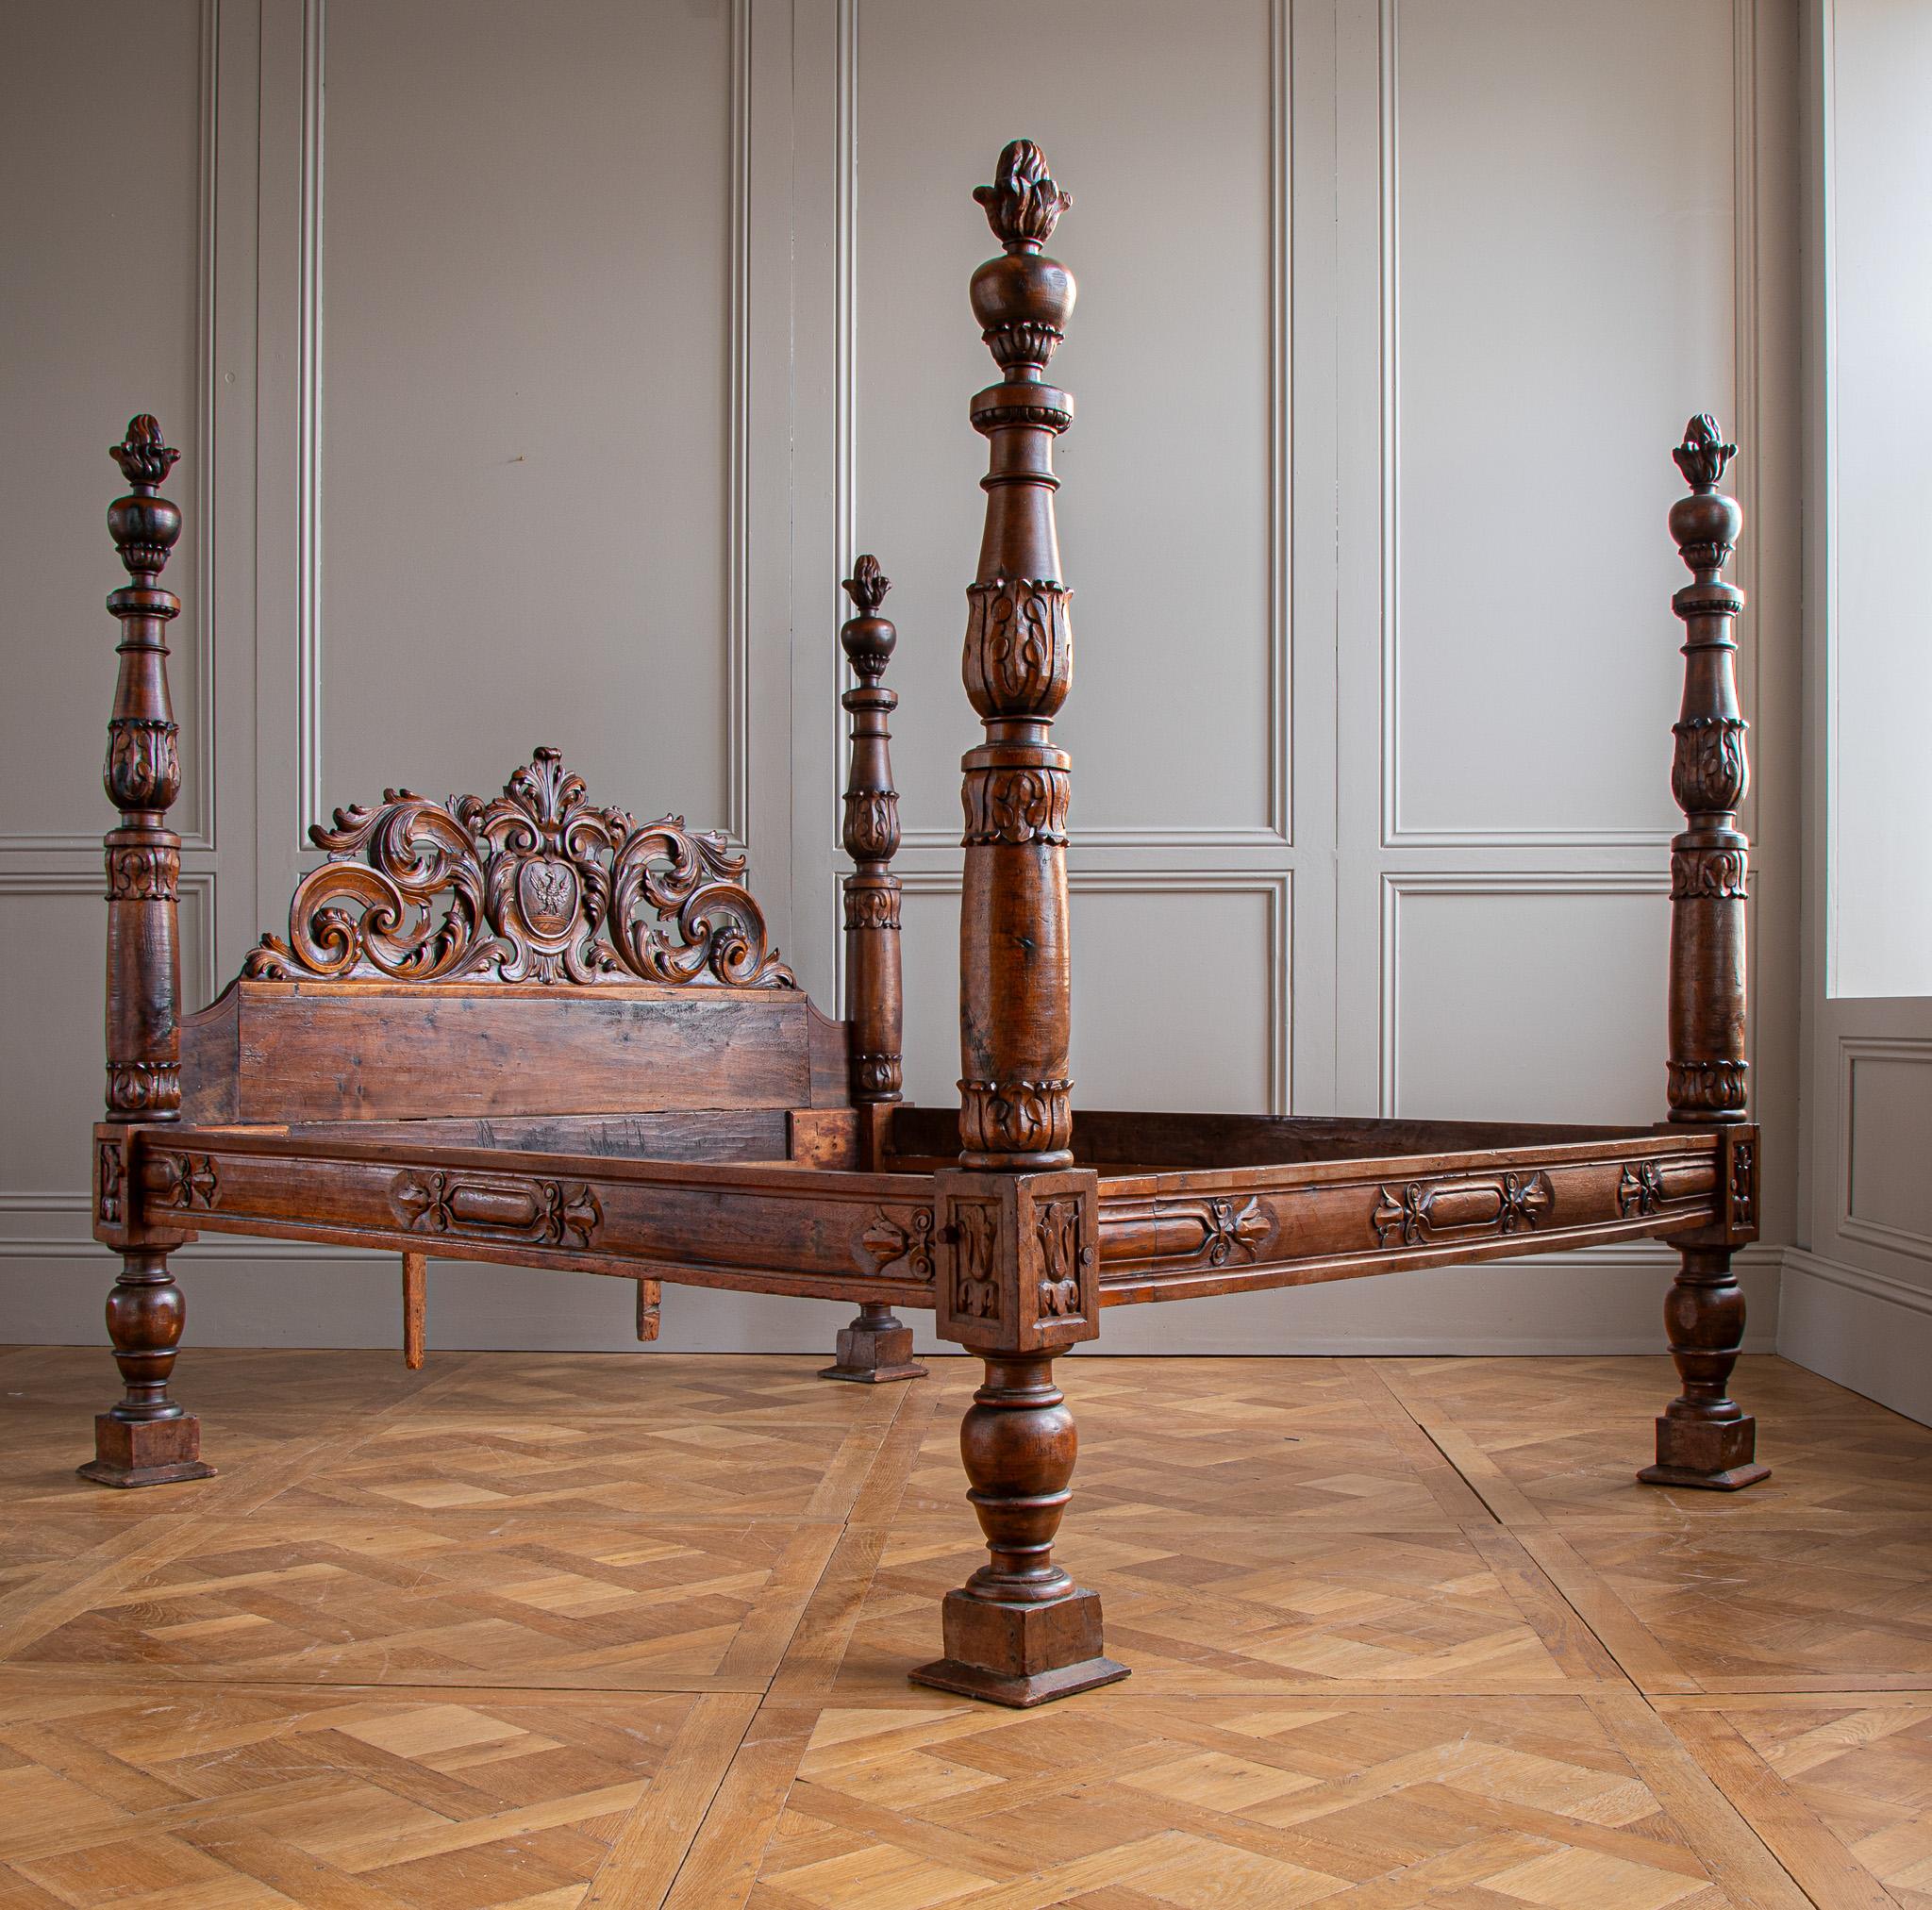 Circa mid 1800's, An impressive four poster bed from Northern Italy in the Baroque style. The bedstead, carved in walnut, has a beautiful deep sheen with natural warm highlights on many of the carved sections. The set of four hand-turned columns are